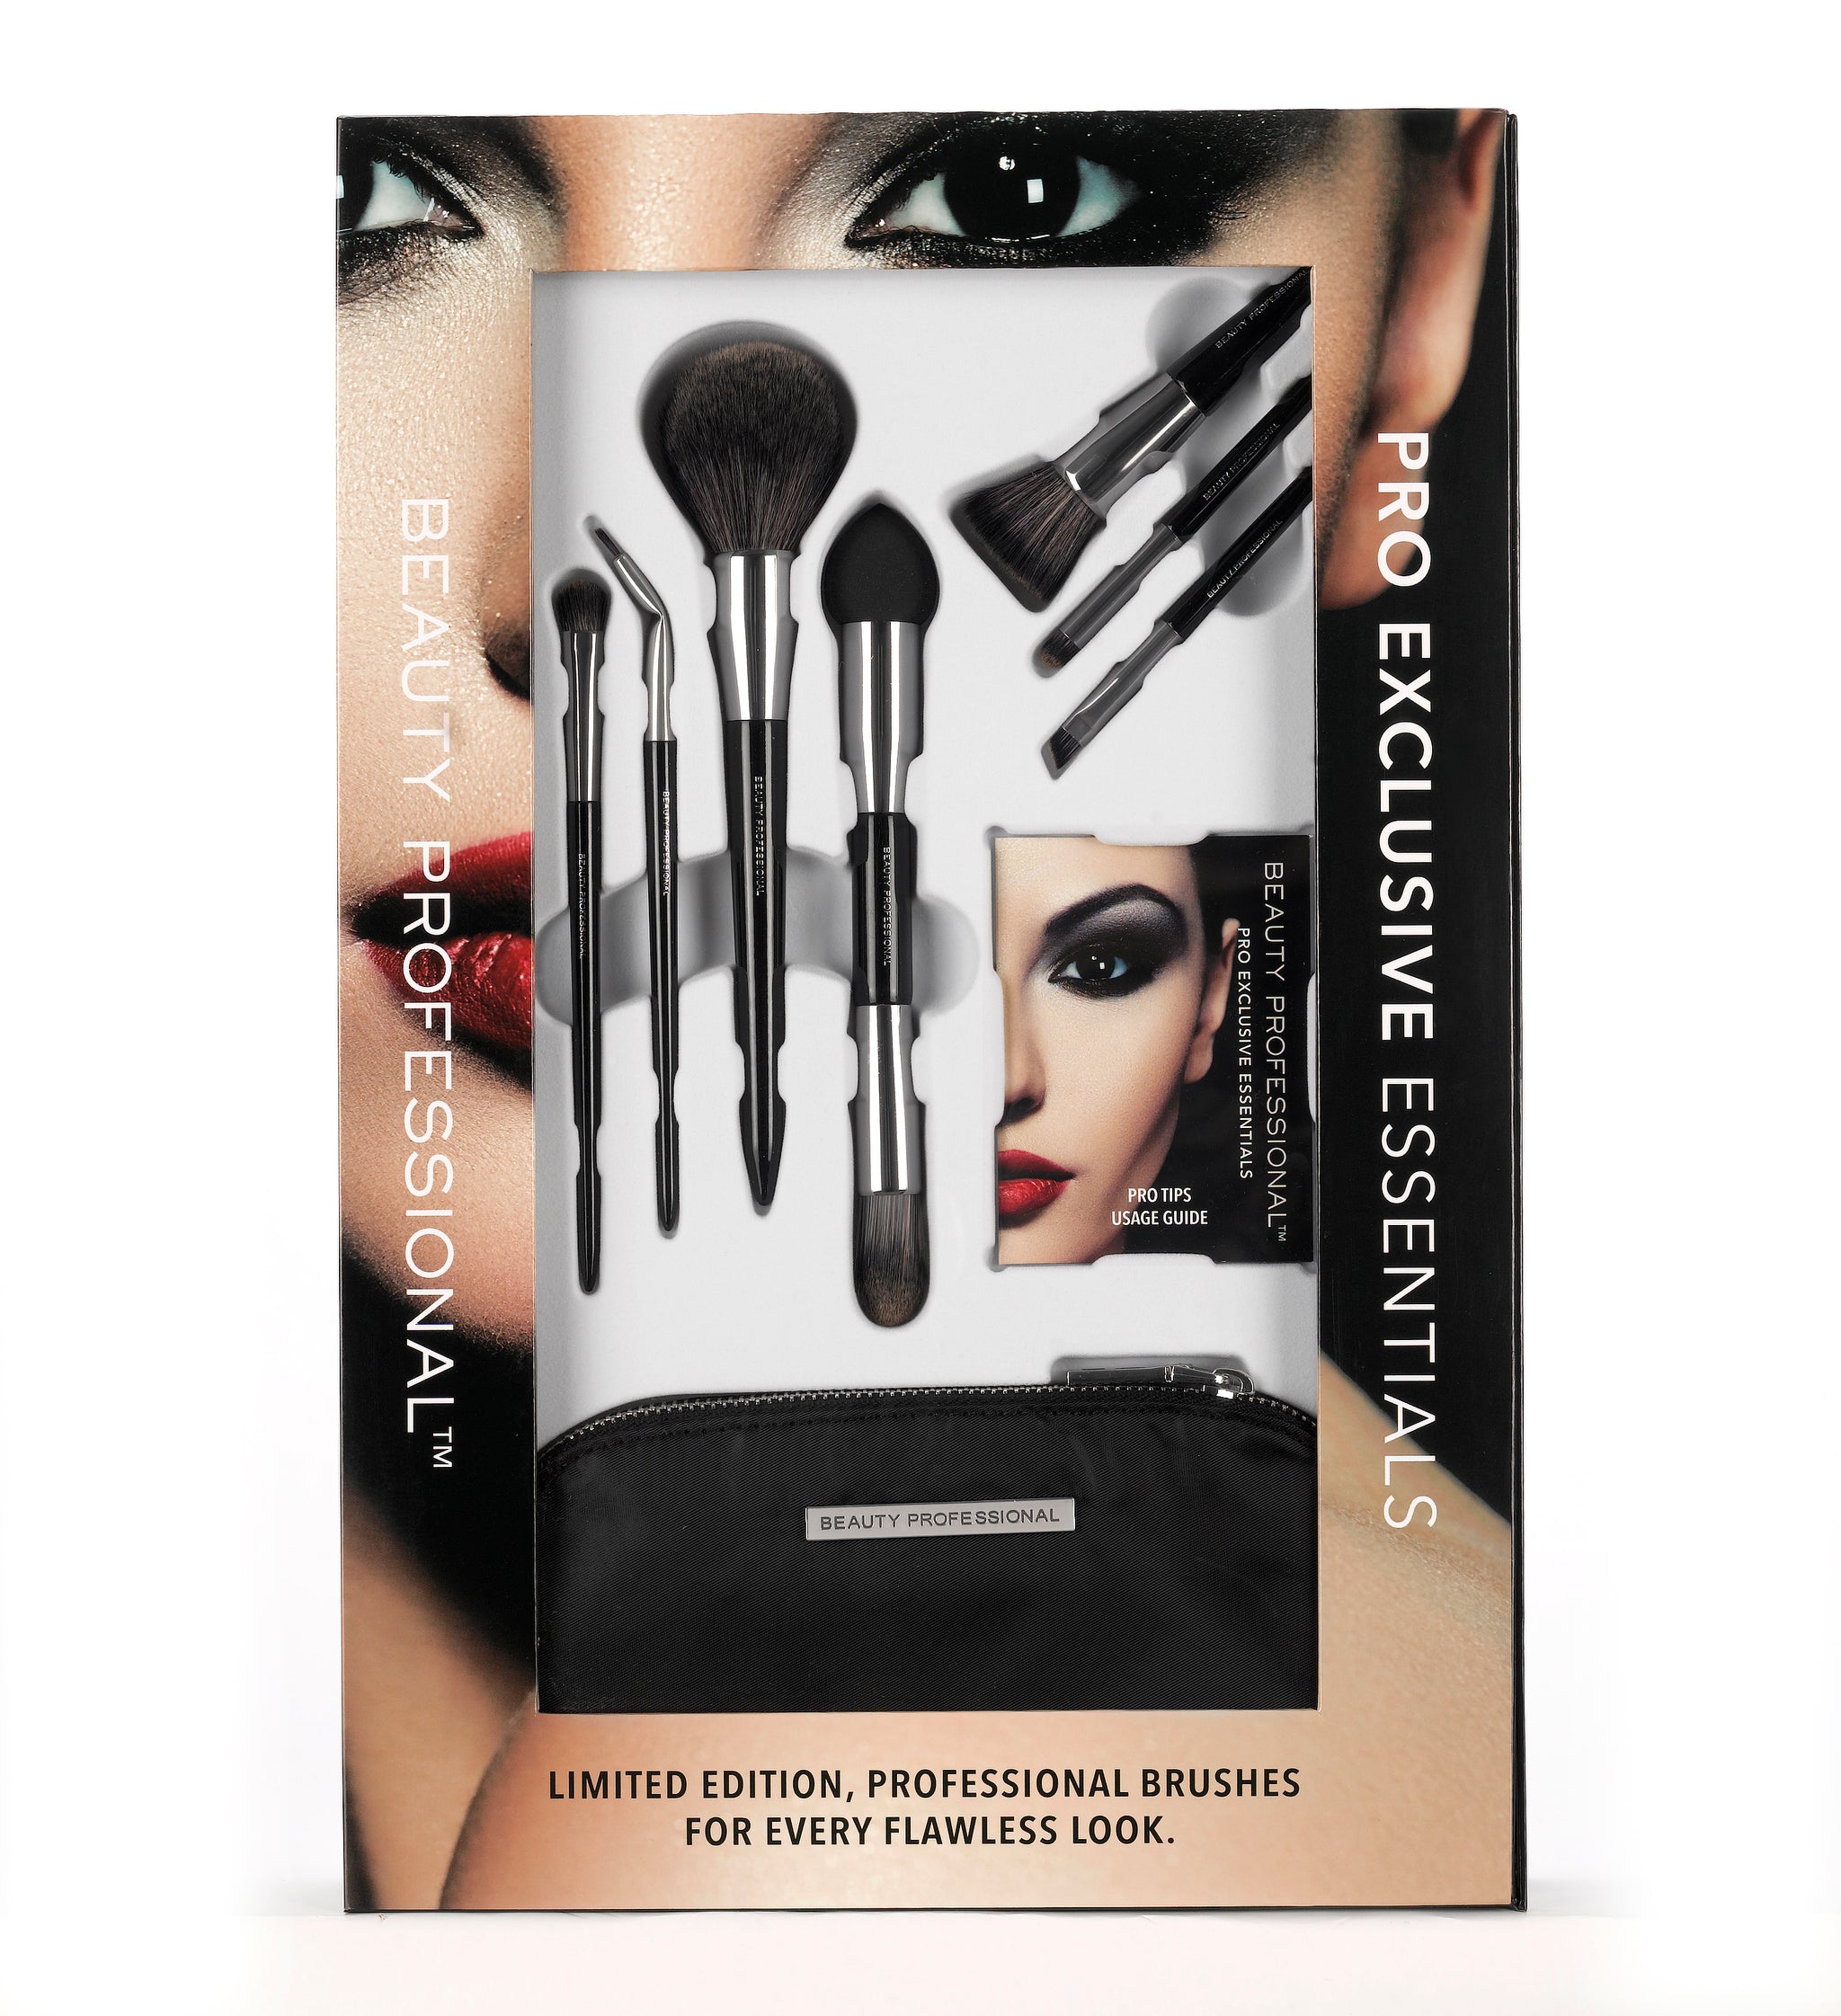 NEW PRO A | beautyprofessional FULL SET AND BRUSH ESSENTIALS: TRAVEL-SIZED